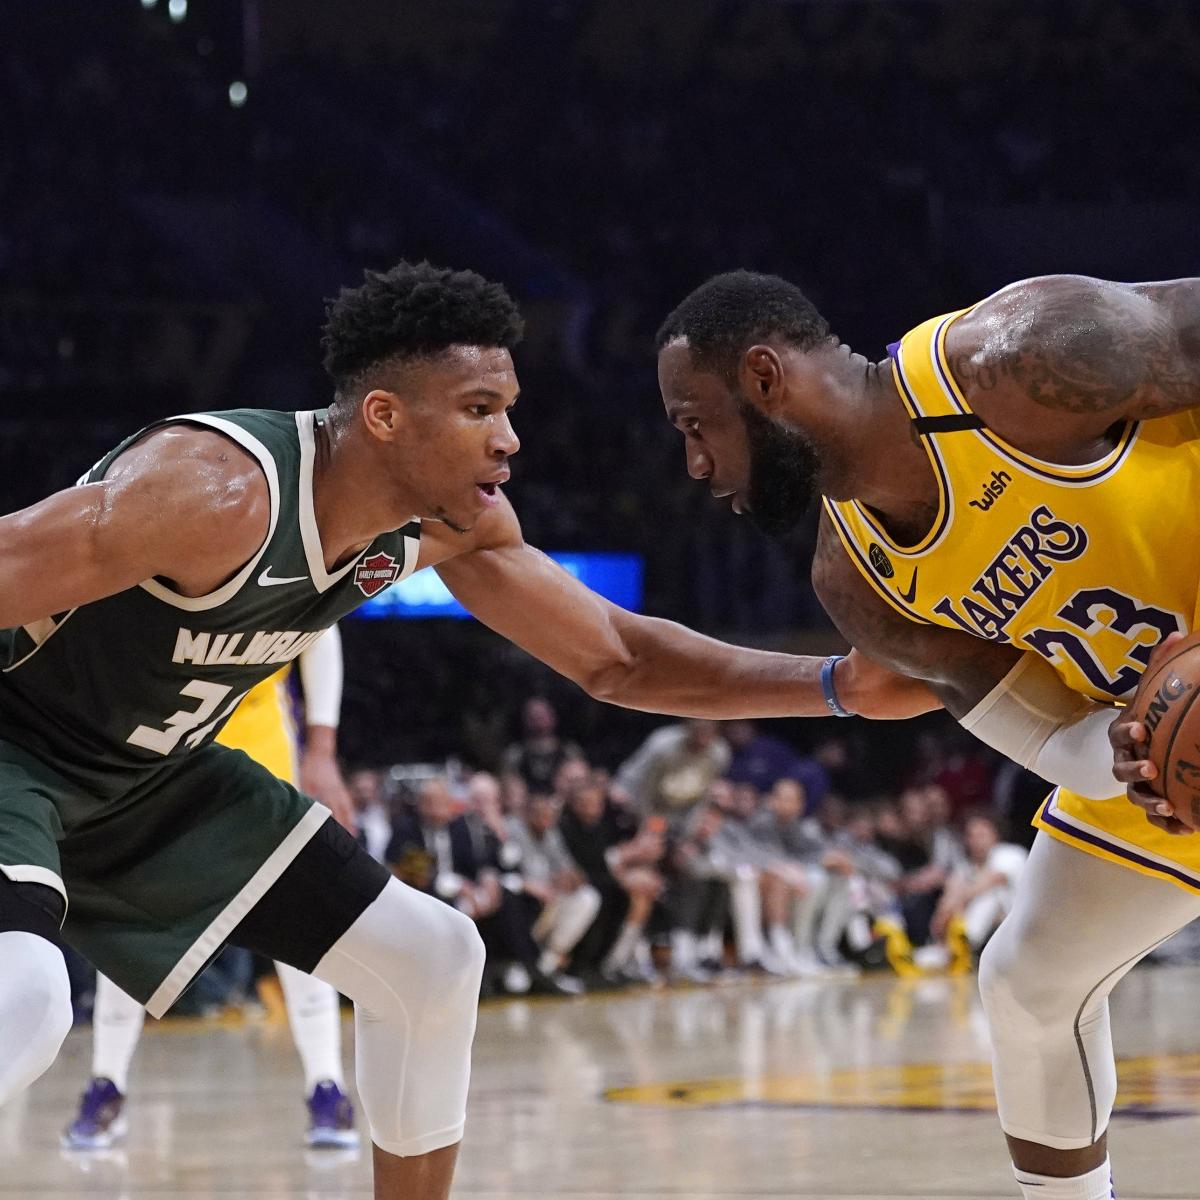 NBA Playoff Bracket 2020: Round-by-Round Guide to the Postseason